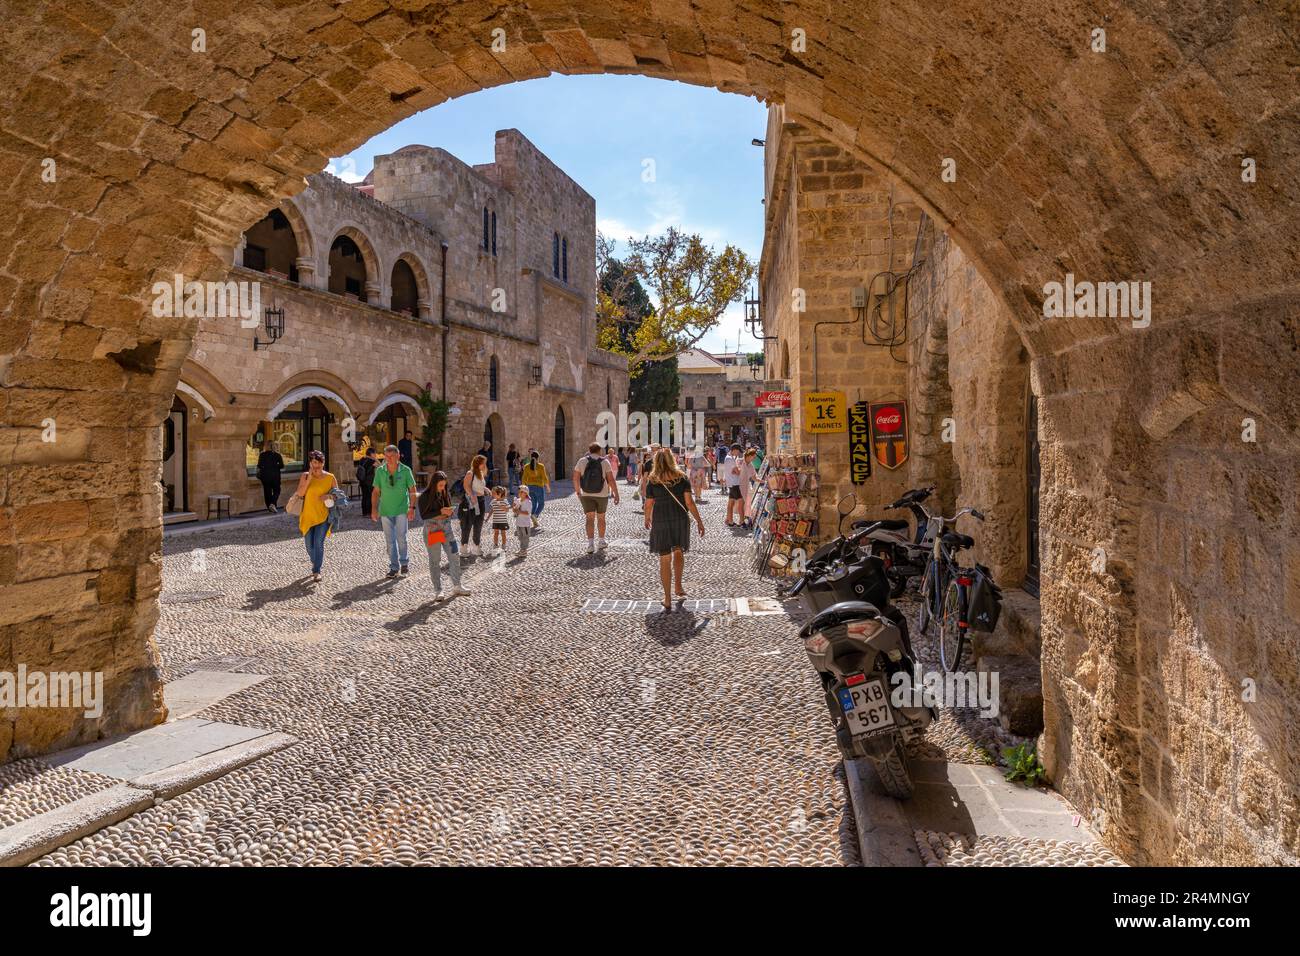 View of shop in Pl. Mouson, Old Rhodes Town, UNESCO World Heritage Site, Rhodes, Dodecanese, Greek Islands, Greece, Europe Stock Photo